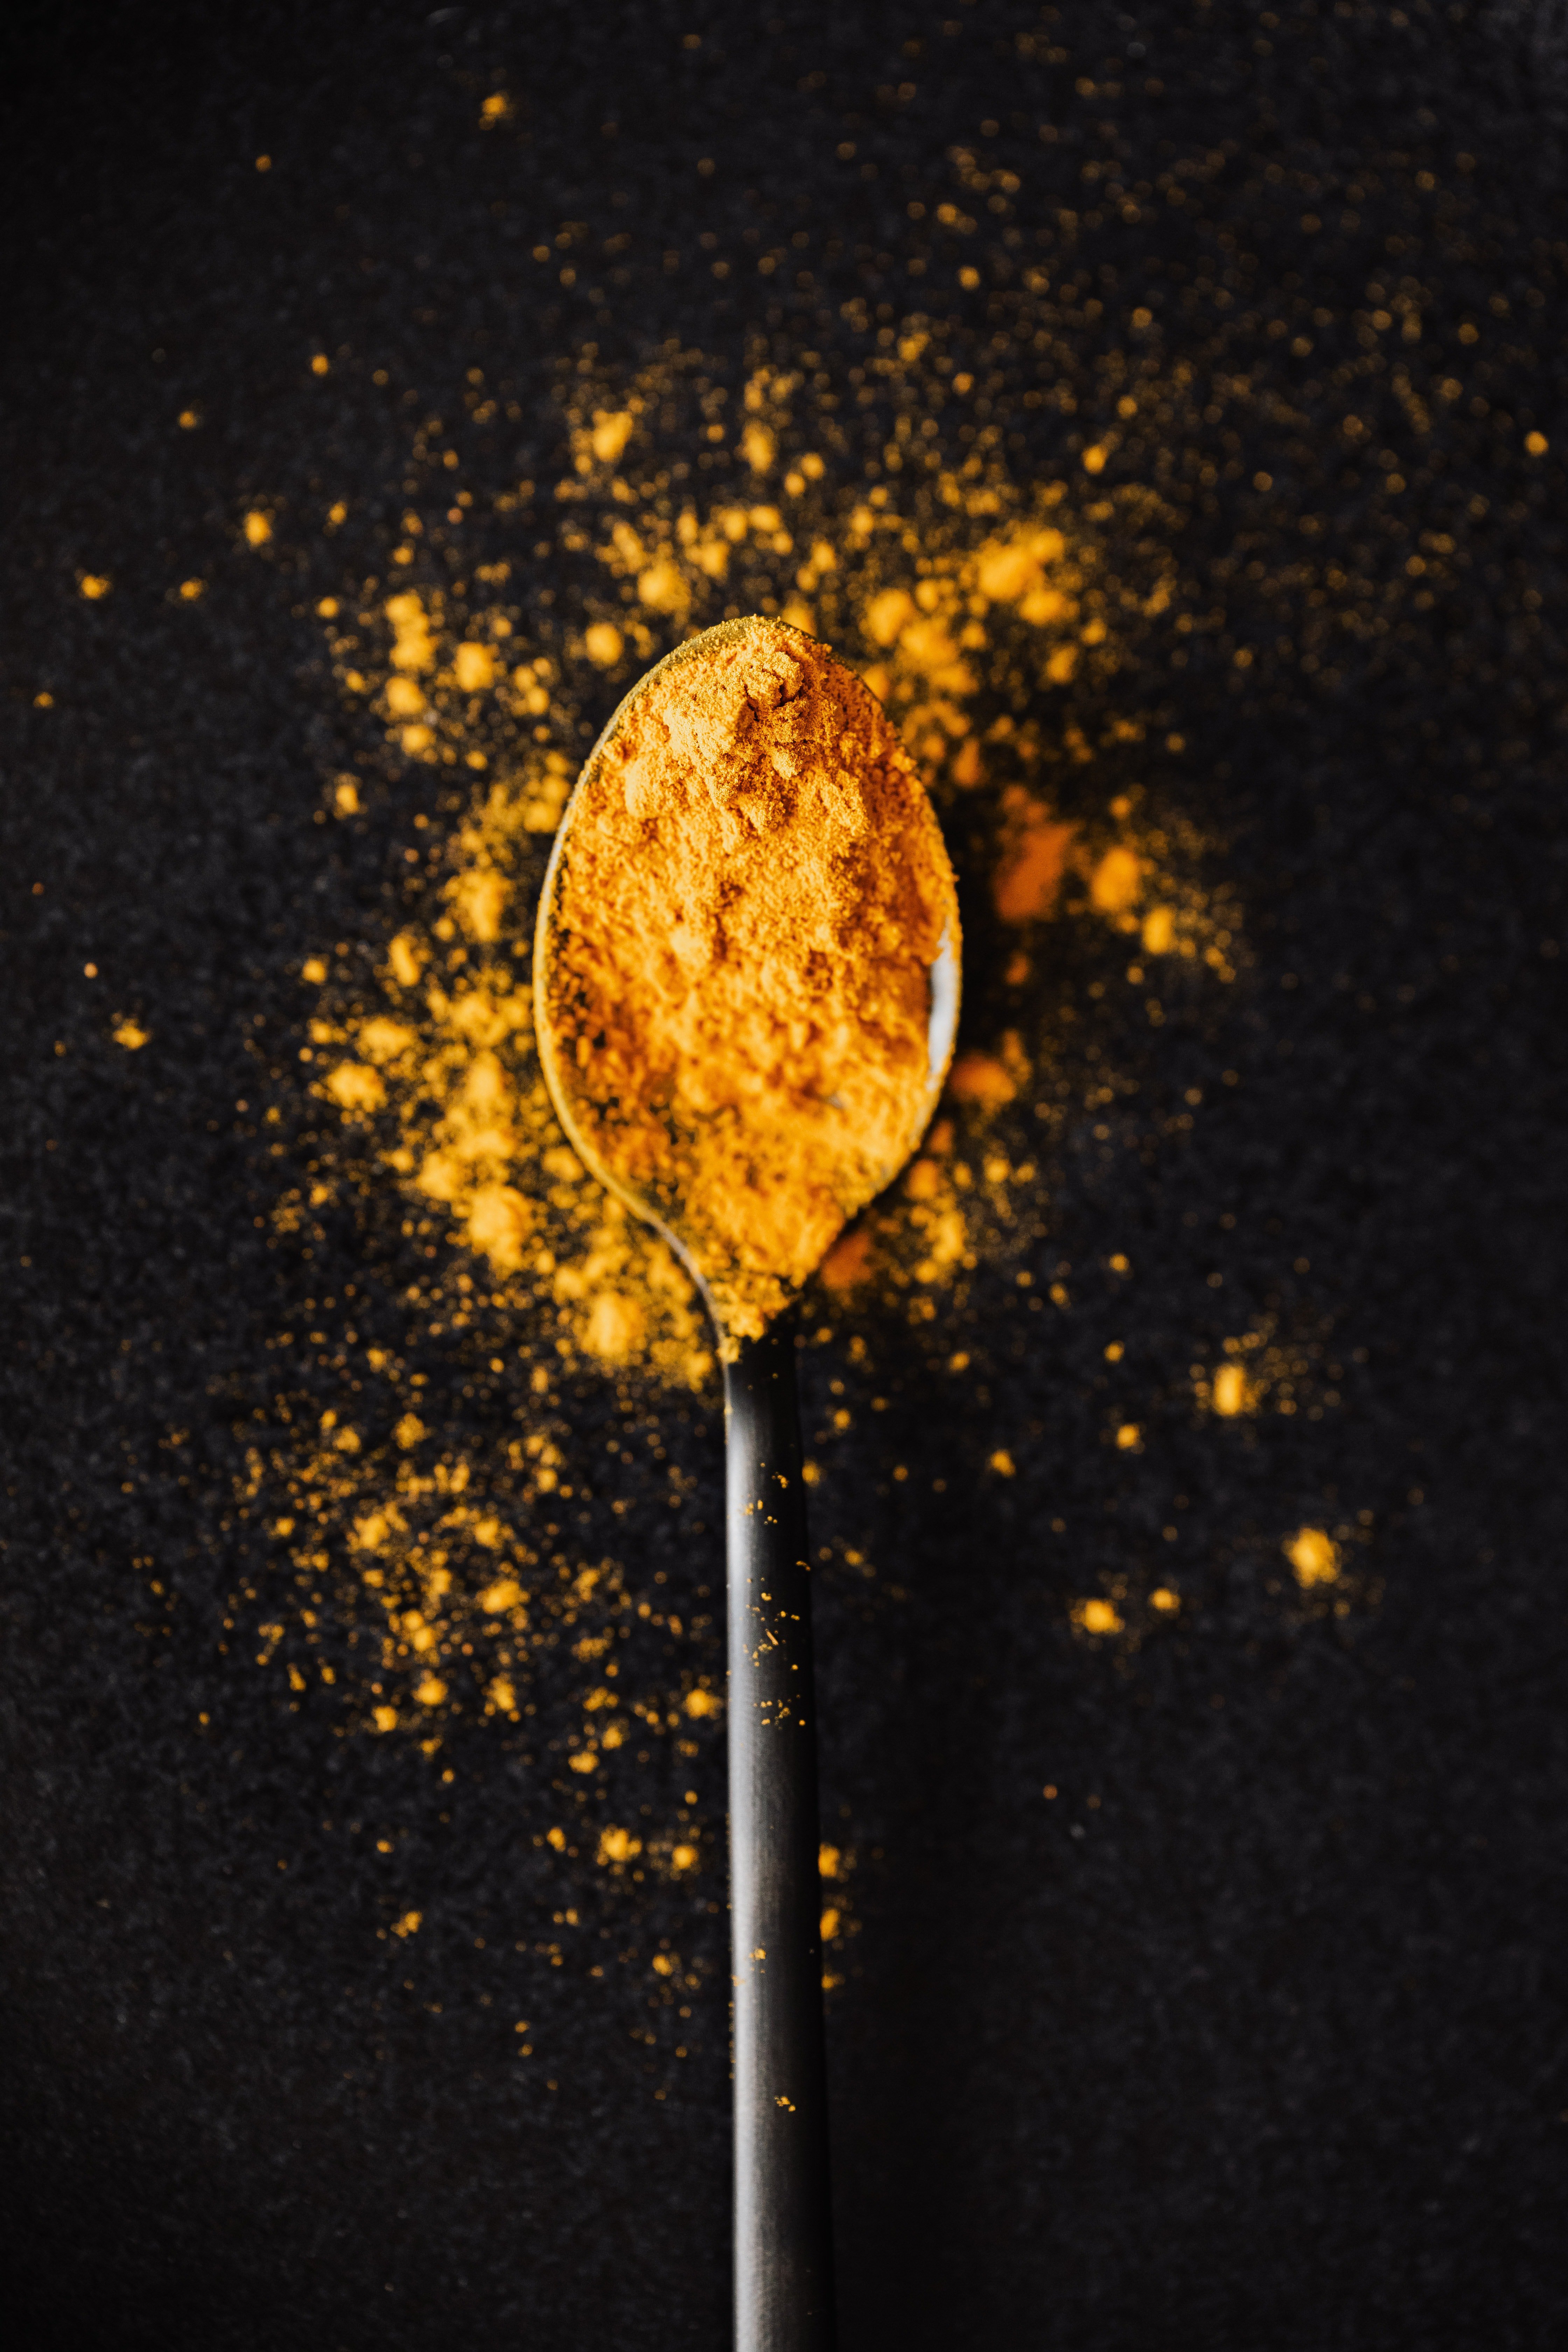 Image of turmeric powder in a spoon